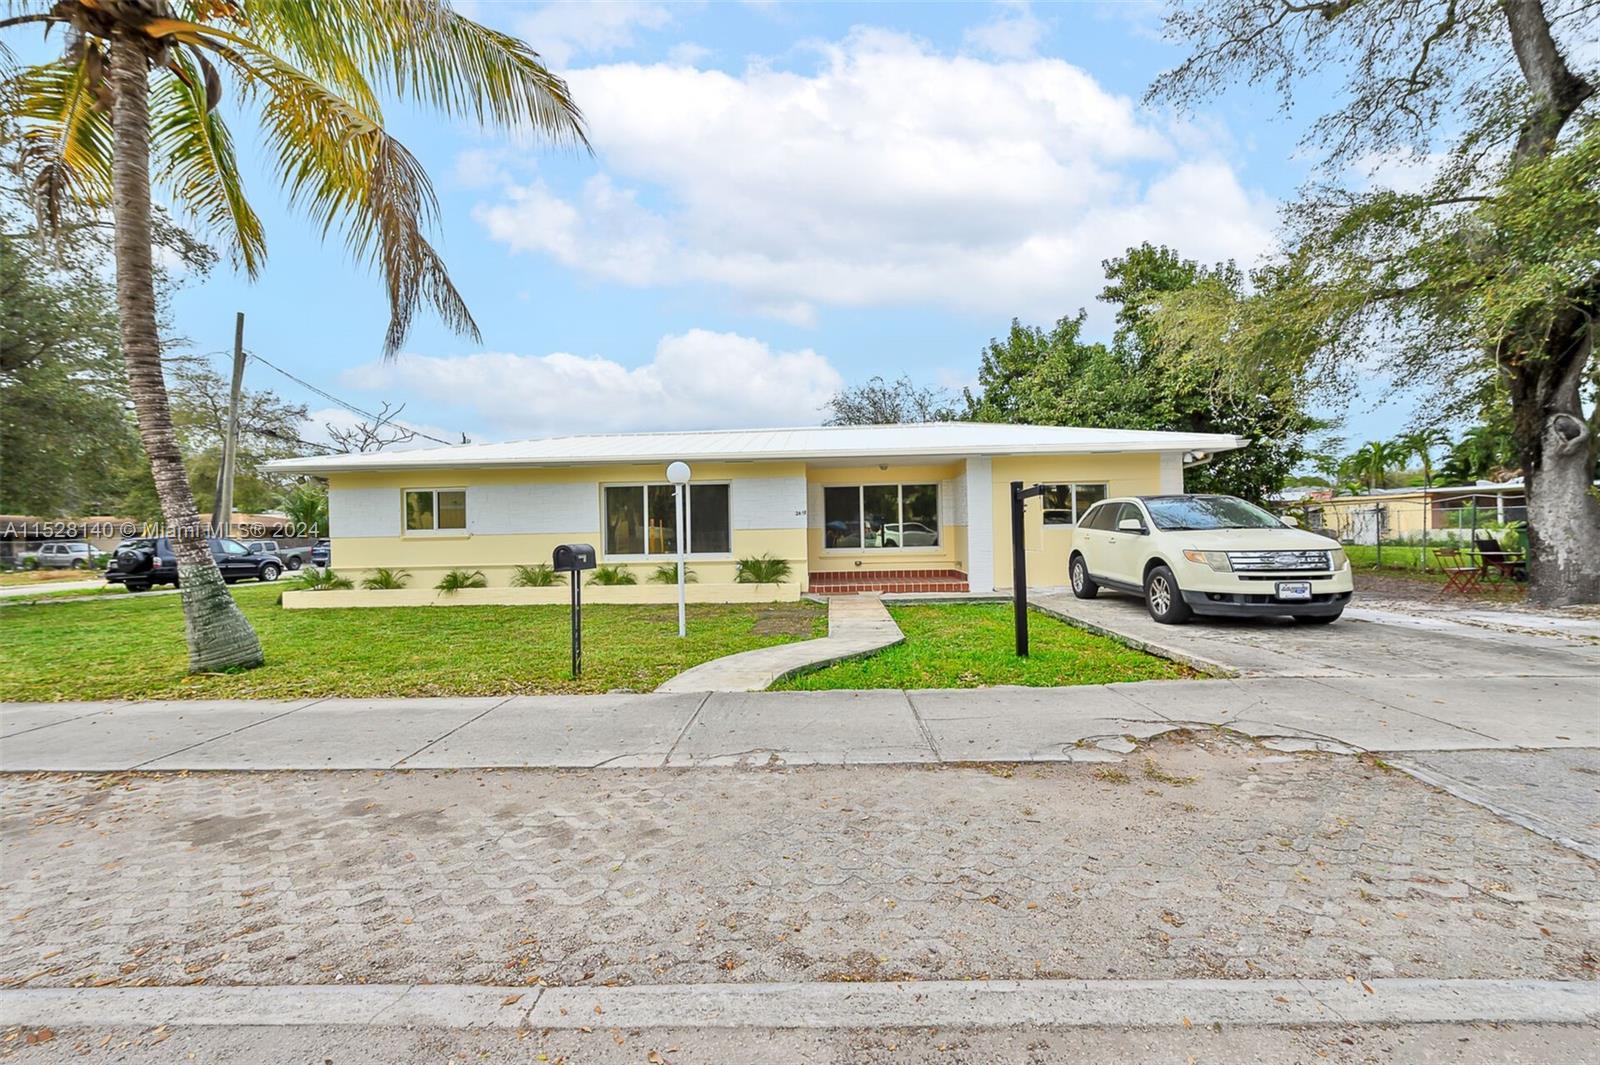 Photo of 2481 NW 14th St in Miami, FL